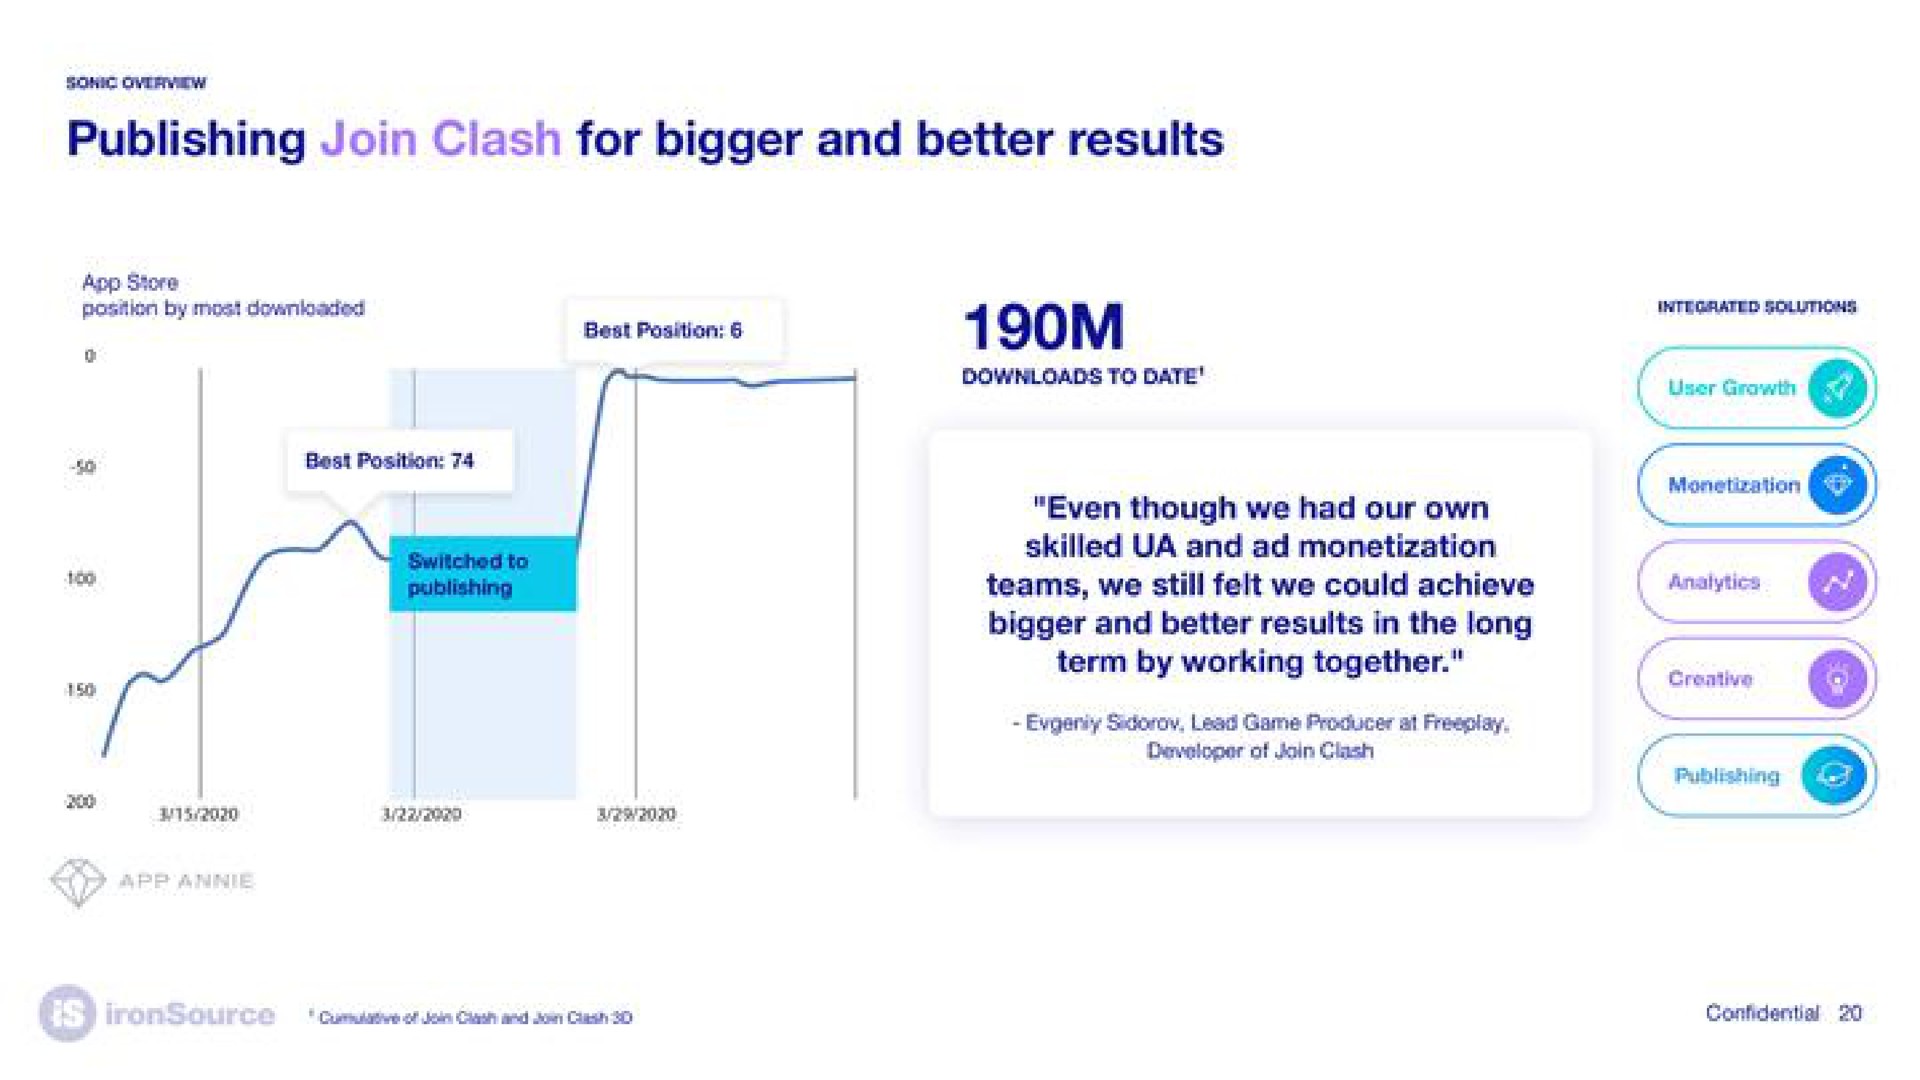 publishing join clash for bigger and better results teams we still felt we could achieve | ironSource